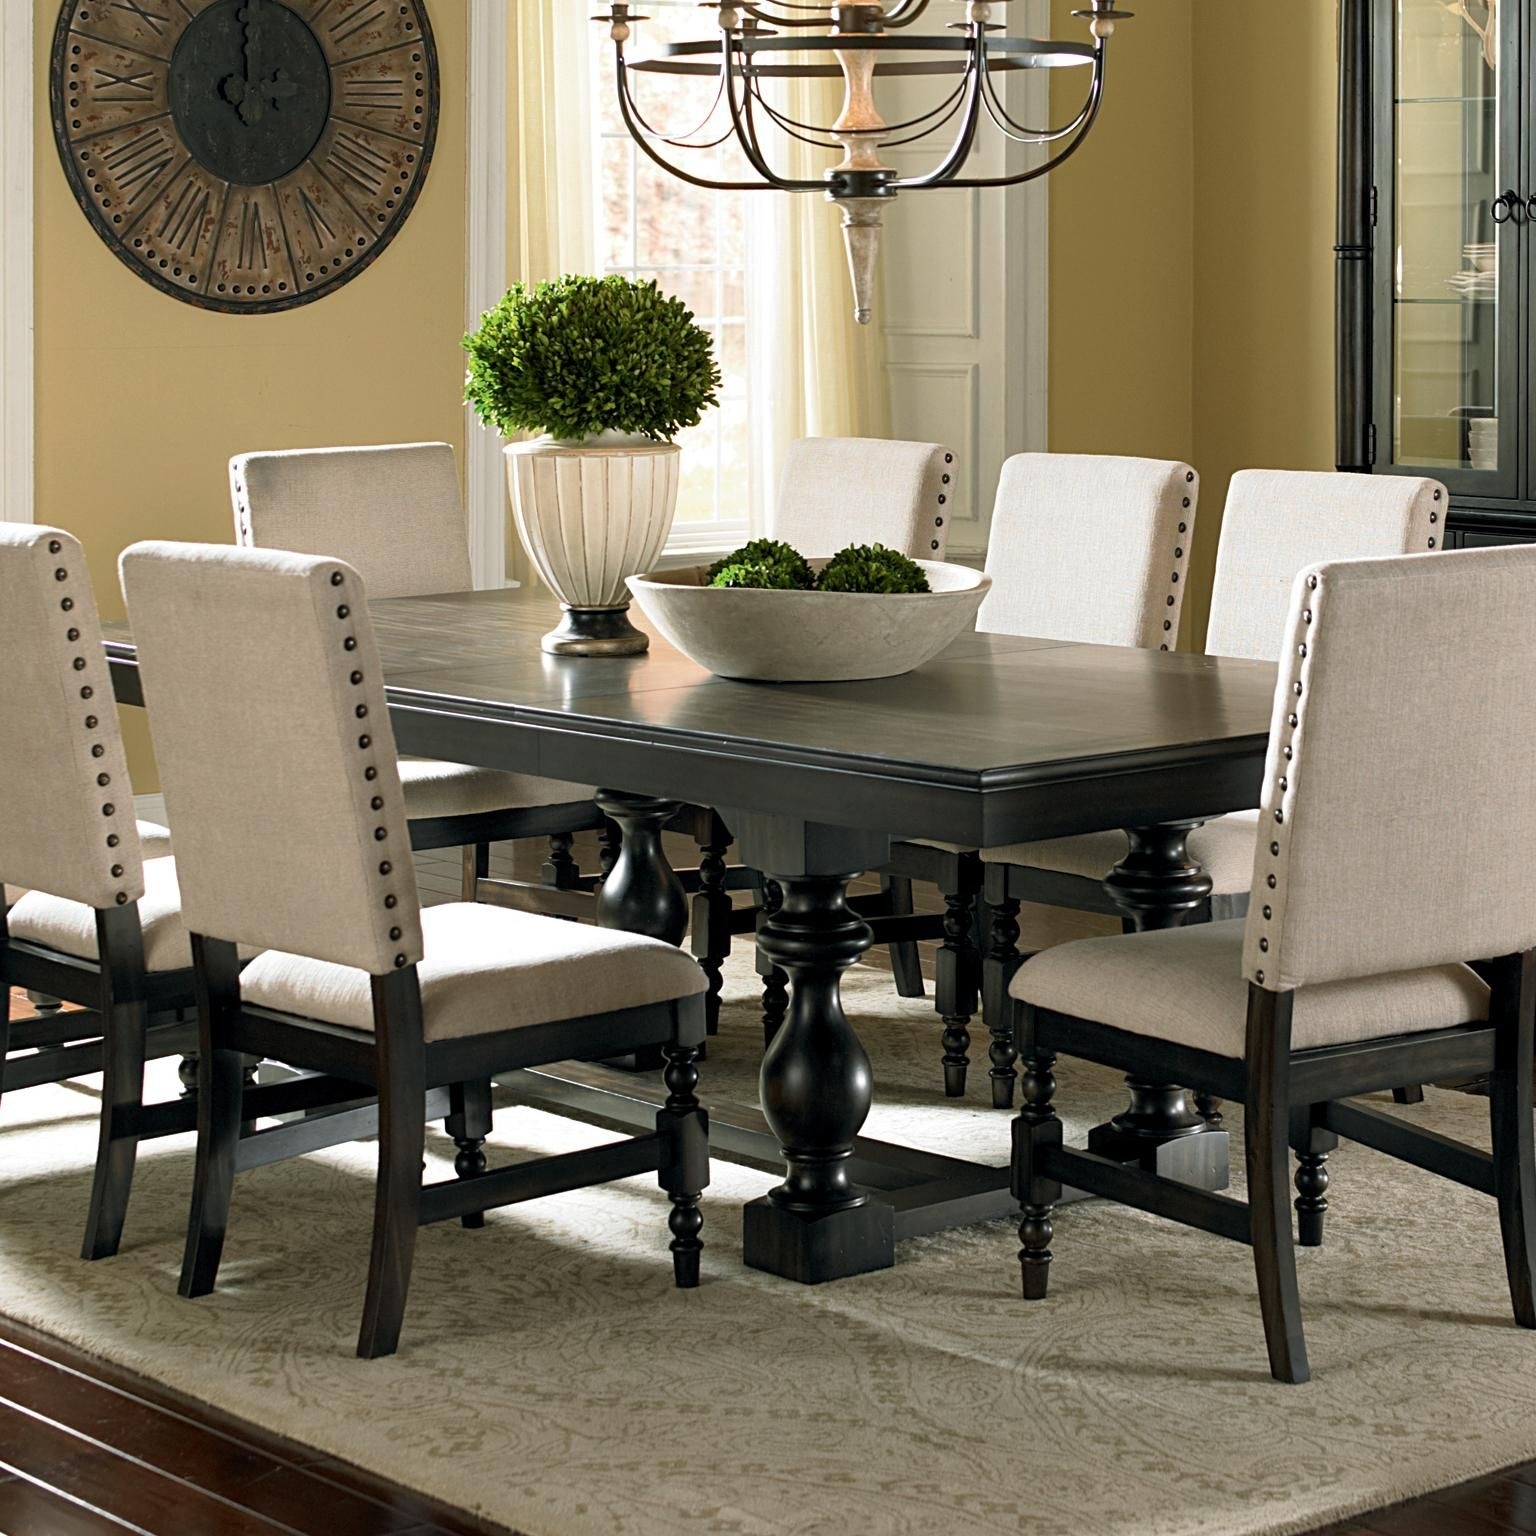 Black Dining Room Sets For Cheap